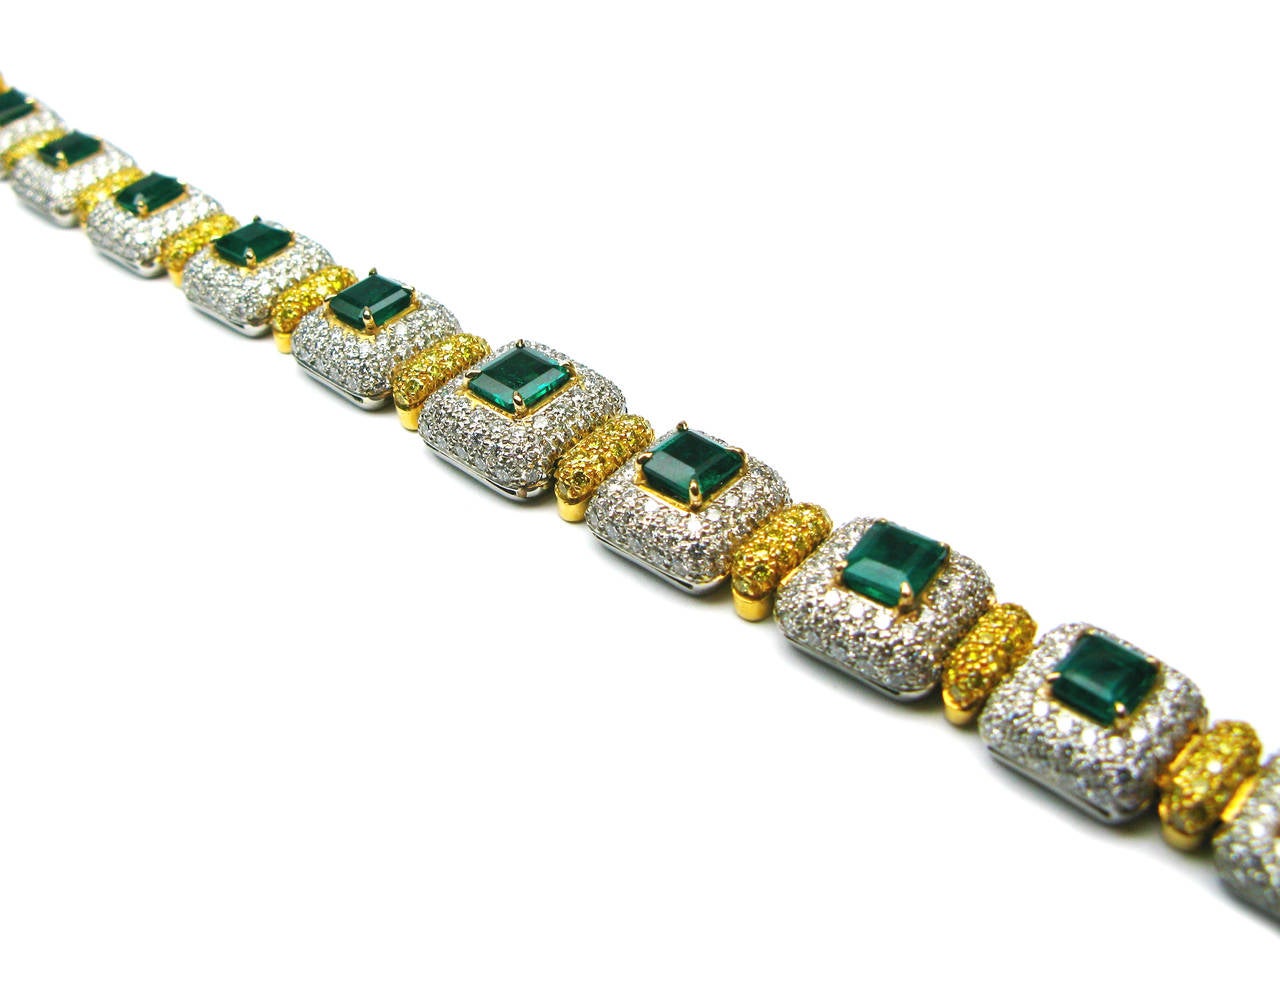 This one of a kind bracelet is a gorgeous combination of sparkle and rich, intense color. 9.63 carats of vibrant green emeralds are set in yellow gold against a glimmering background of white pave diamonds set in platinum. Each domed link contains